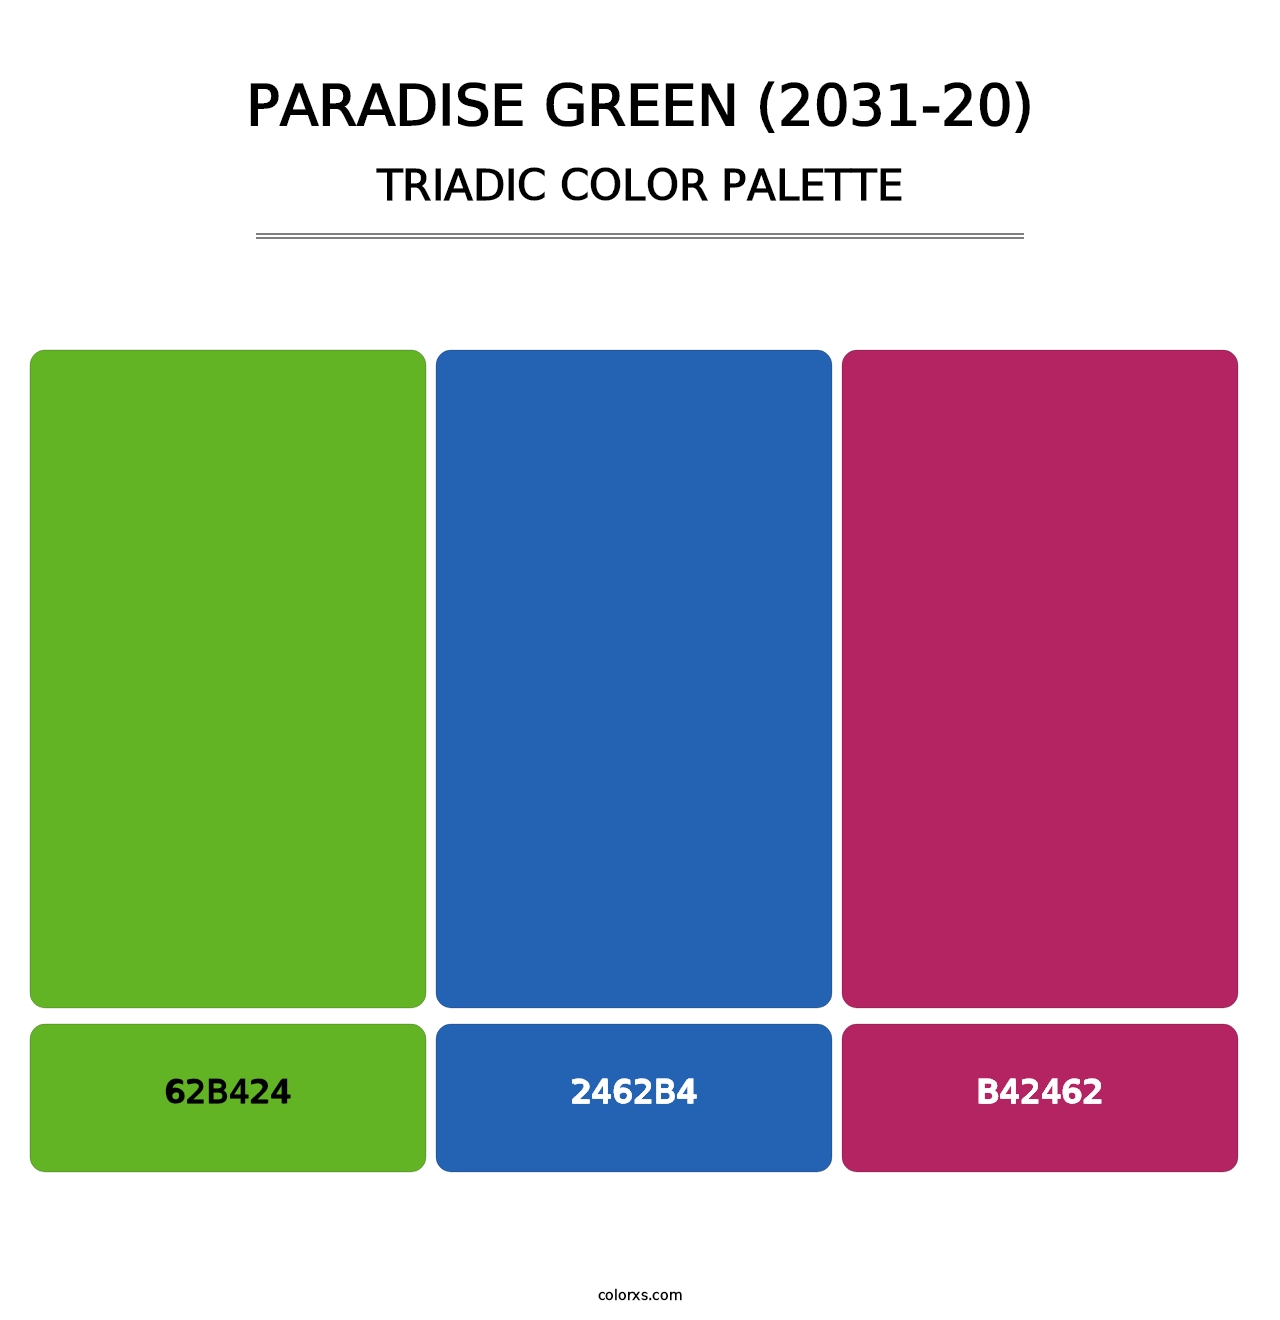 Paradise Green (2031-20) - Triadic Color Palette